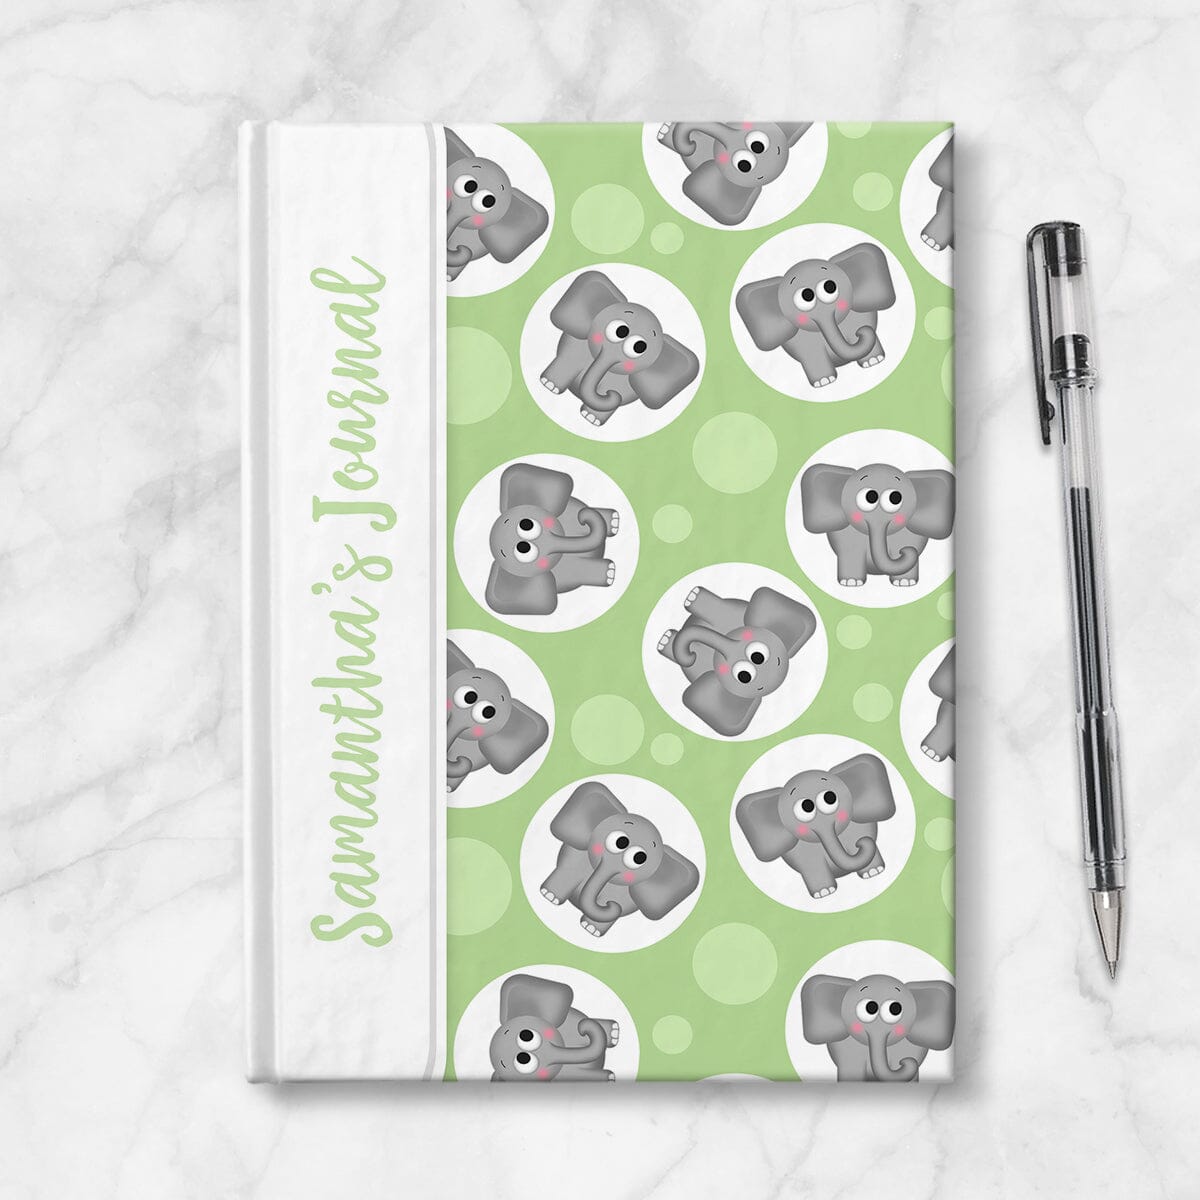 Personalized Cute Green Elephant Journal at Artistically Invited. Image shows the book on a countertop next to a pen.